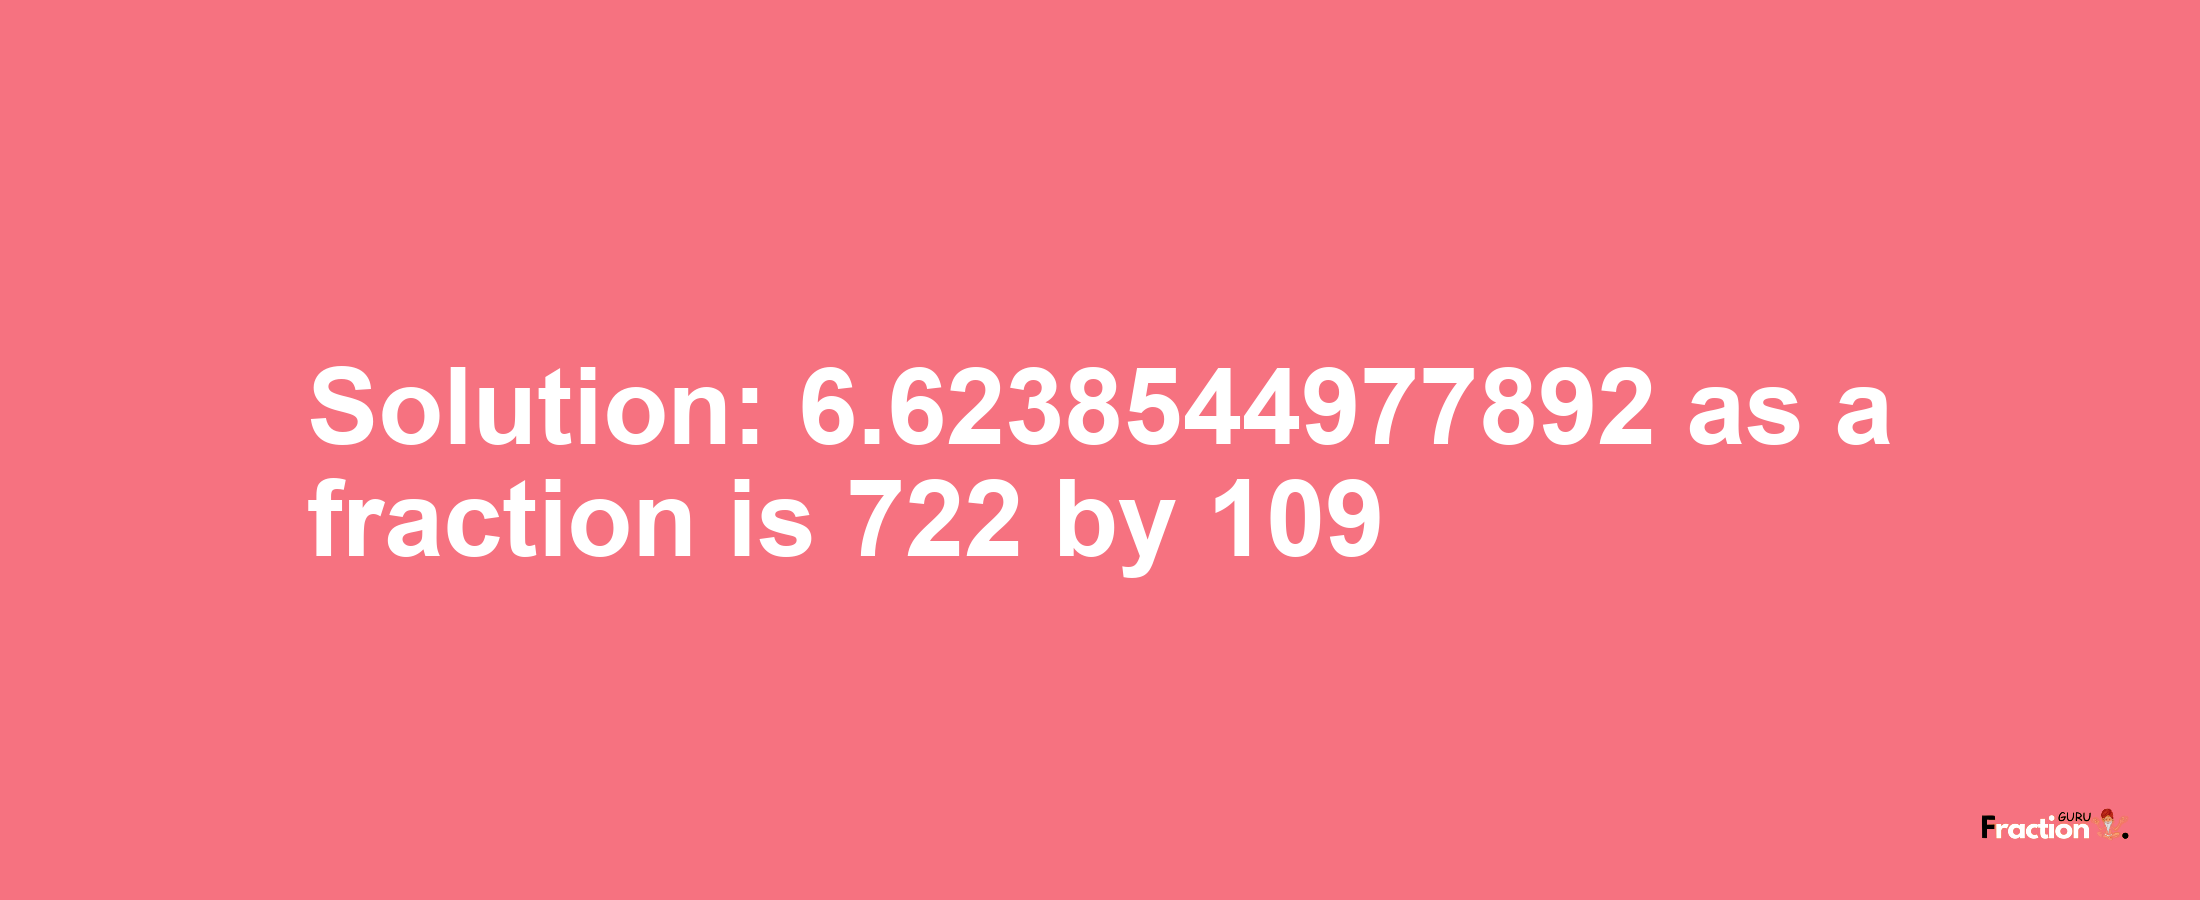 Solution:6.6238544977892 as a fraction is 722/109